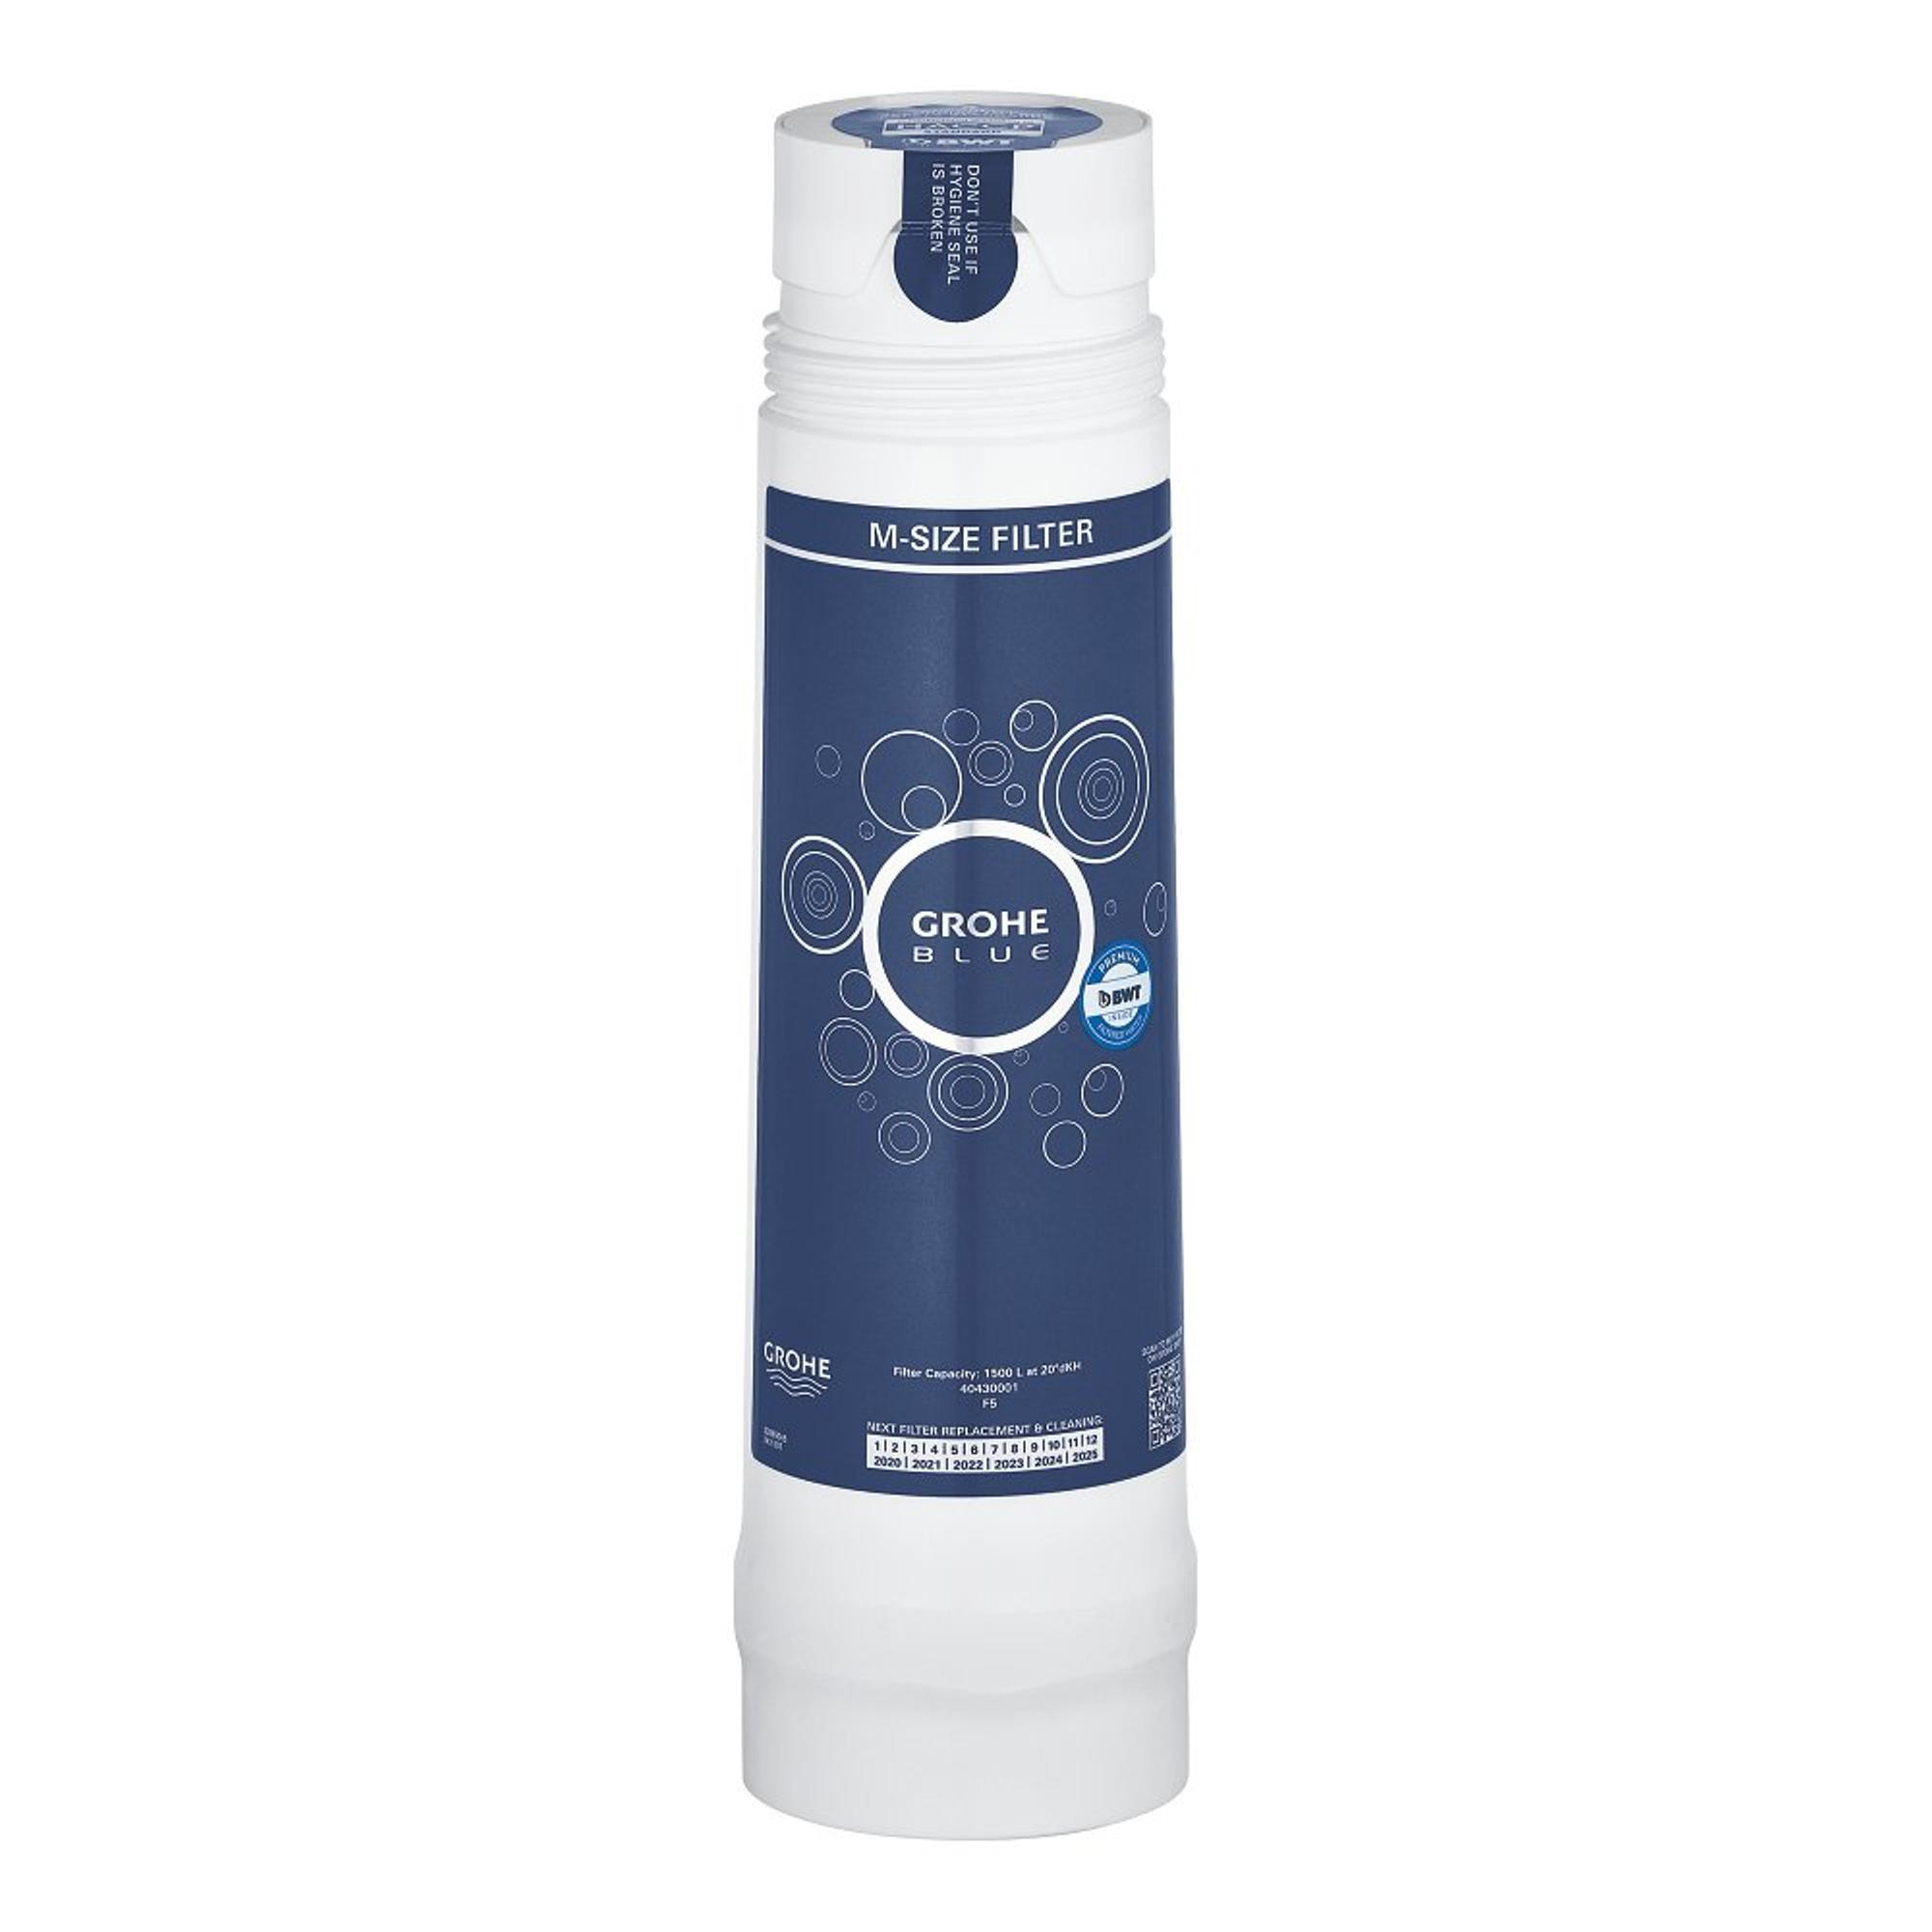 GROHE Blue BWT filter 1500L - 40430001 